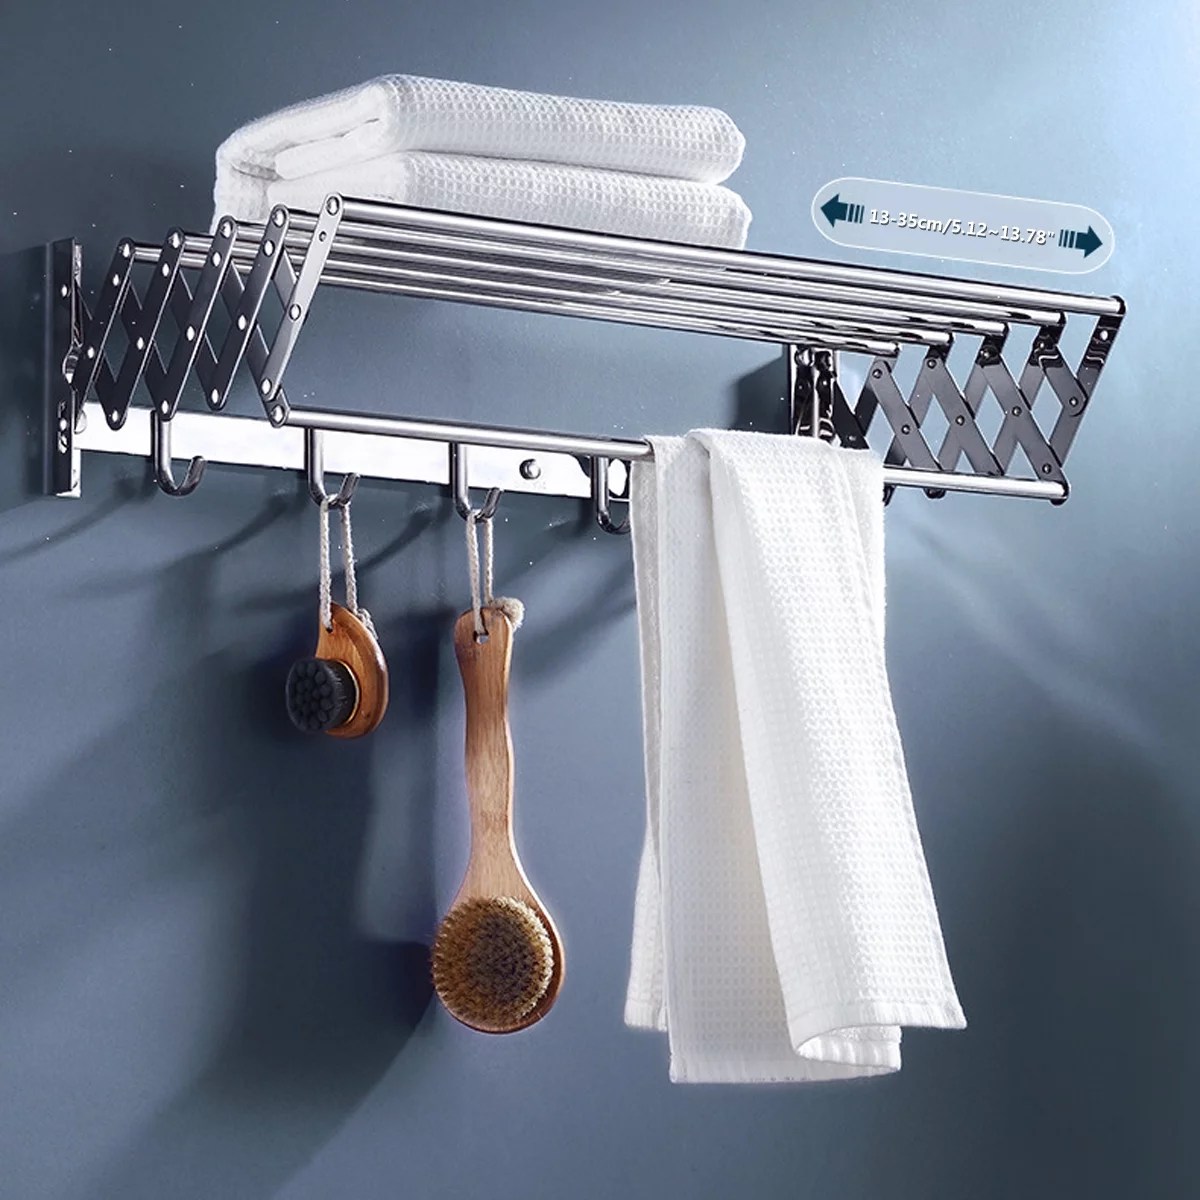 23.62" / 31.50" Towel Rack Stainless Steel Wall Mounted Expandable